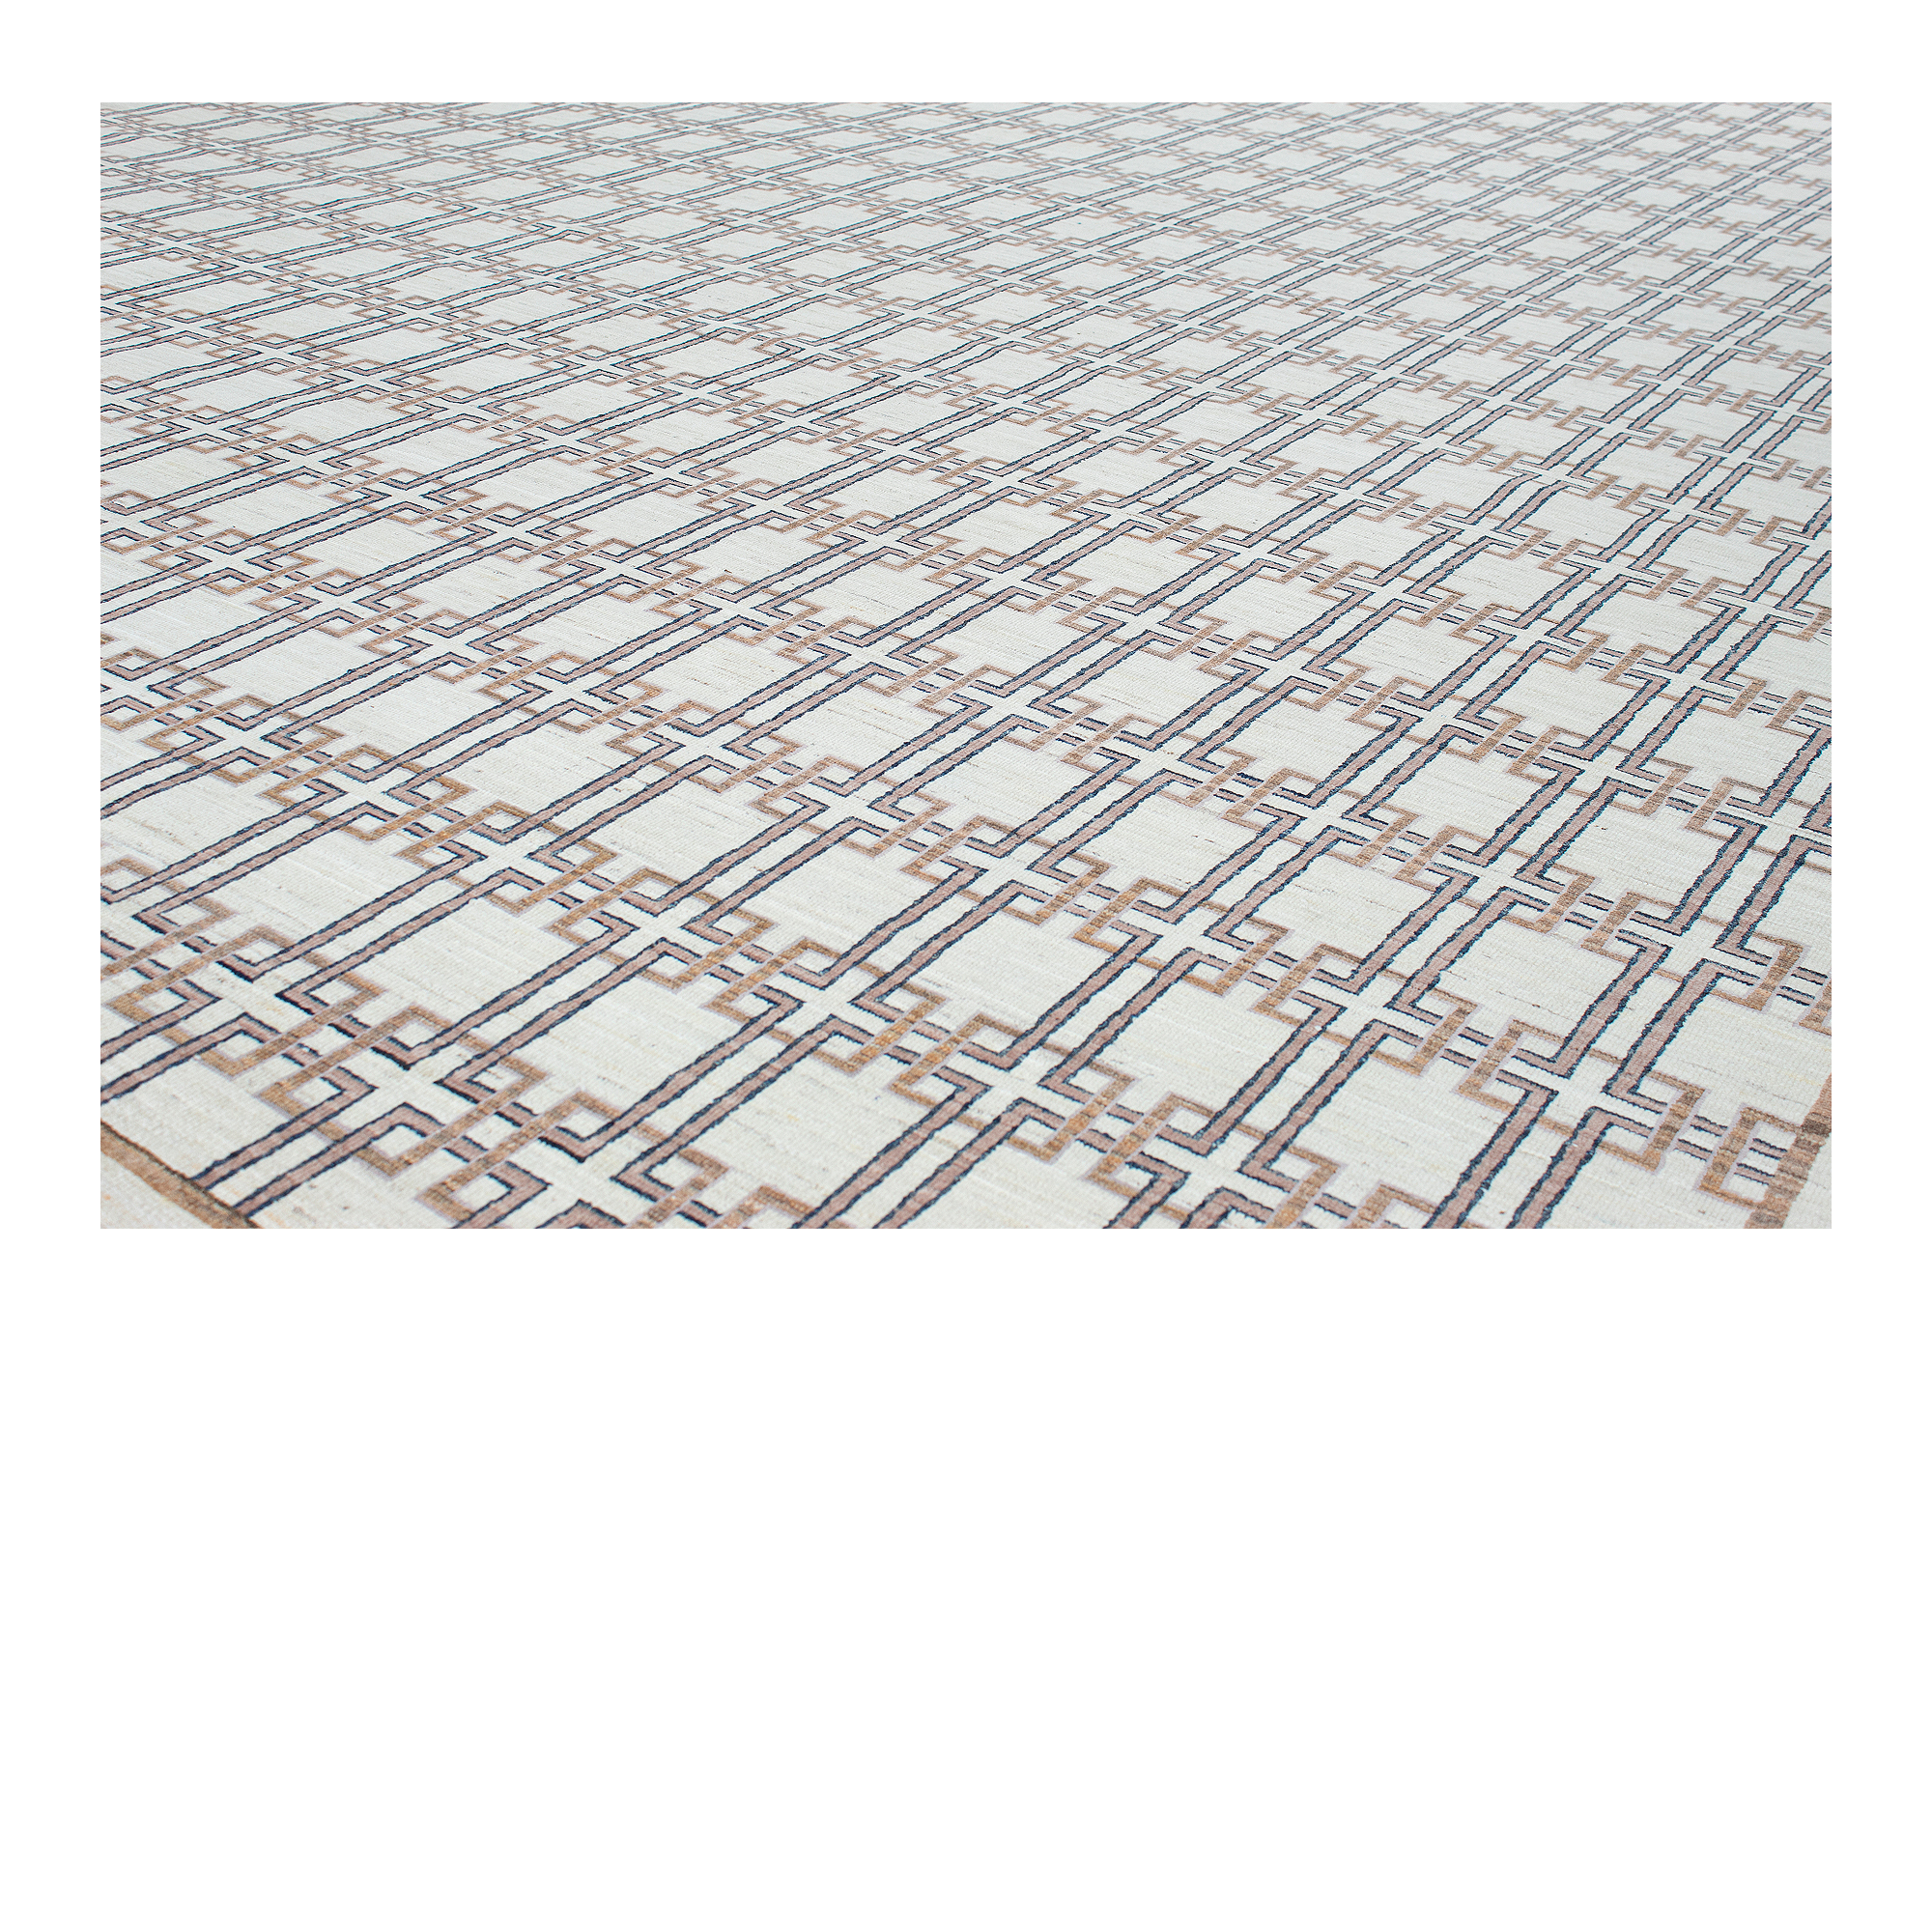 Our Geometric rug is handknotted from the finest hand-carded, hand-spun, naturally dyed wool.